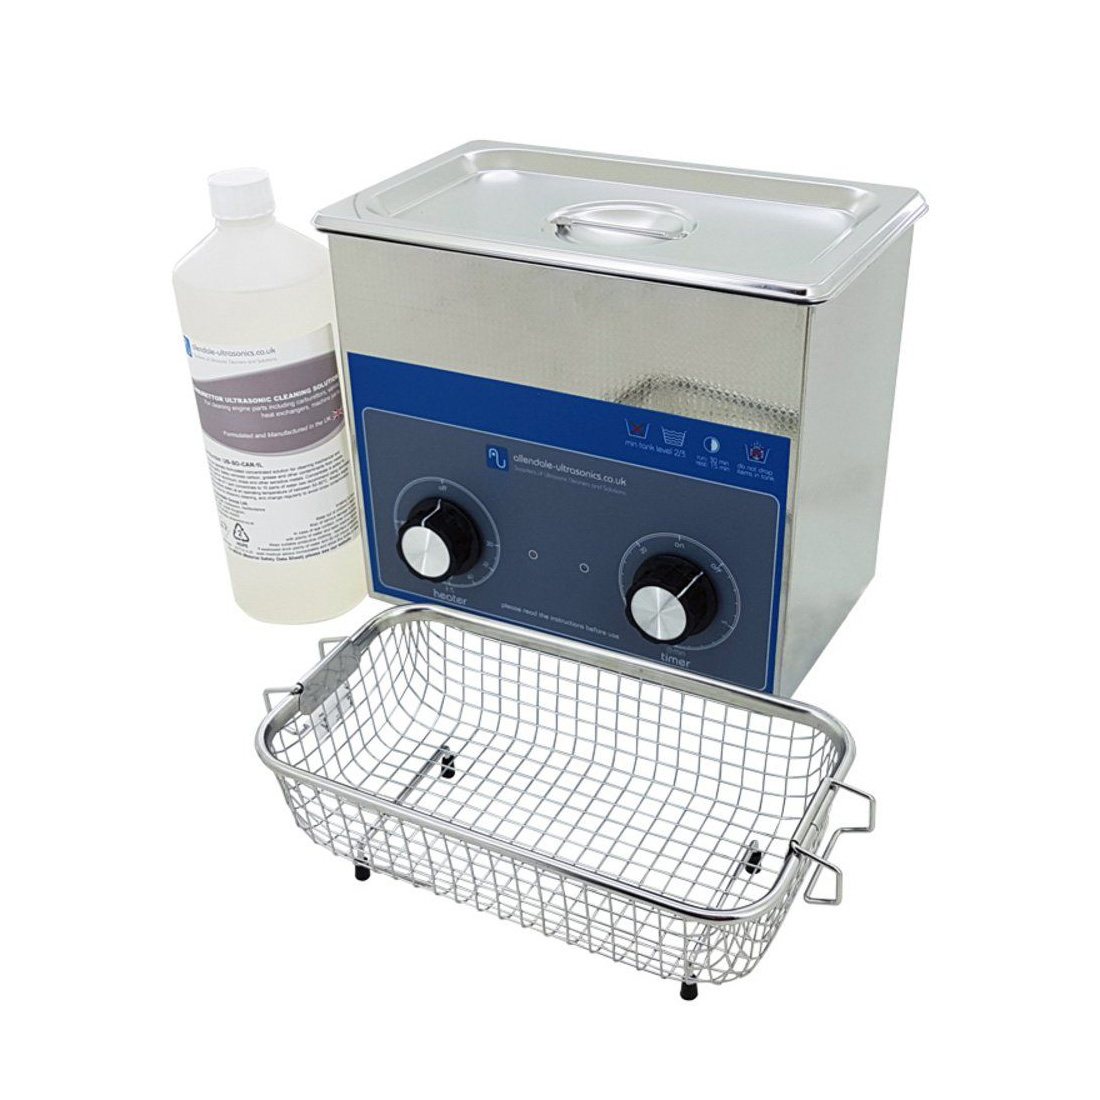 TW200 Trailway Ultrasonic Cleaner & Carb Cleaning Fluid Kit - 3 Litre - Allendale Ultrasonics